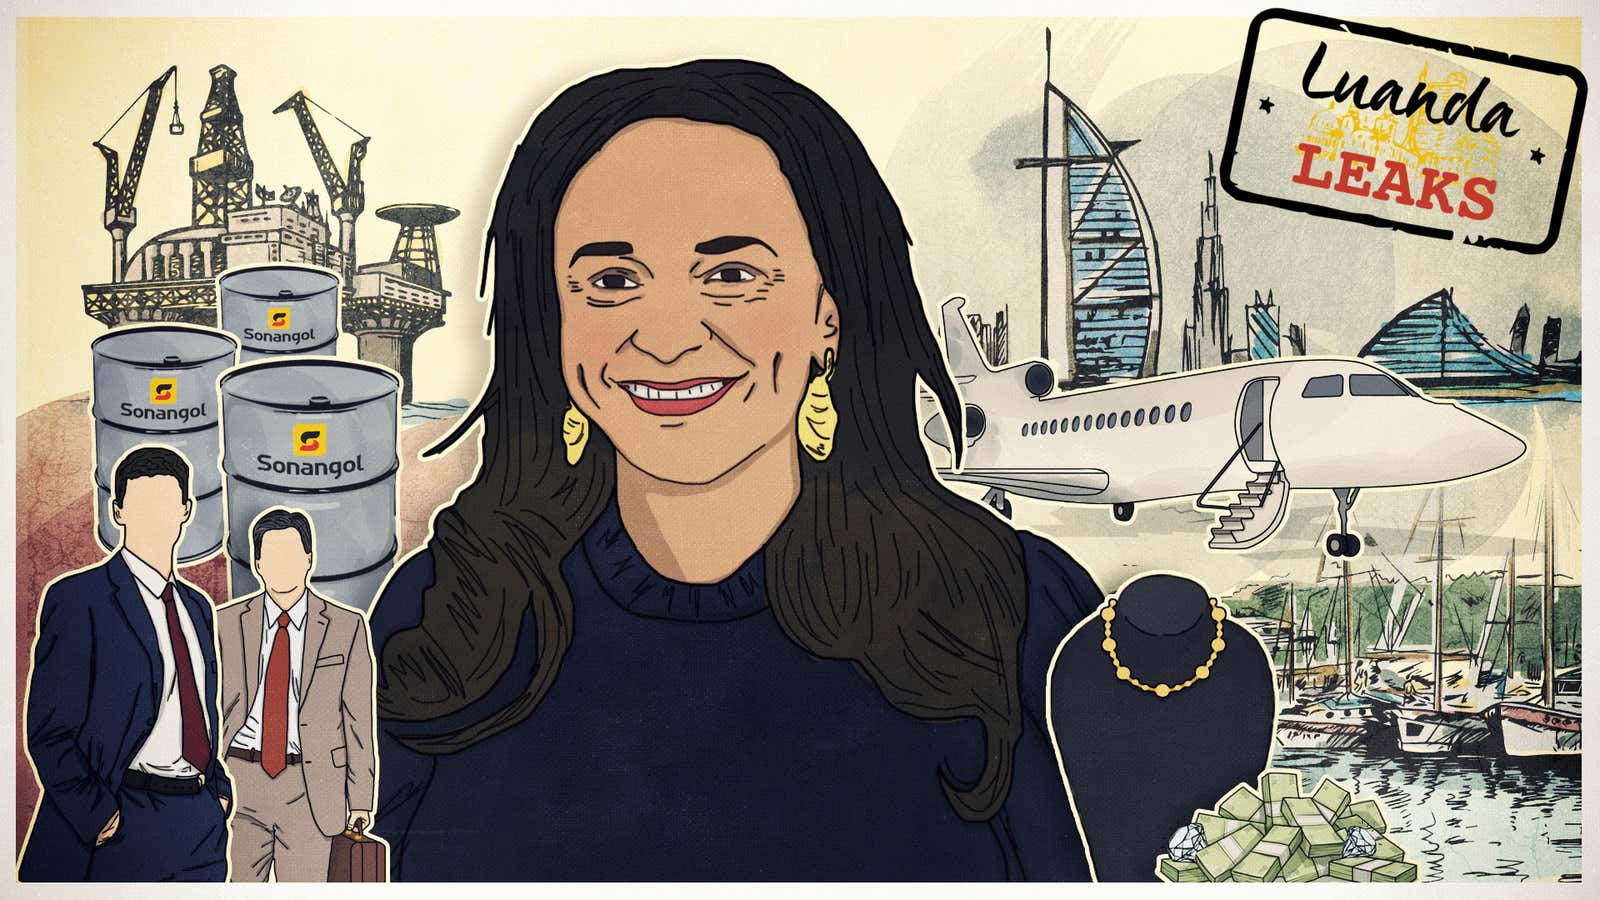 Western consultants like Accenture helped enrich and legitimize Isabel dos Santos.